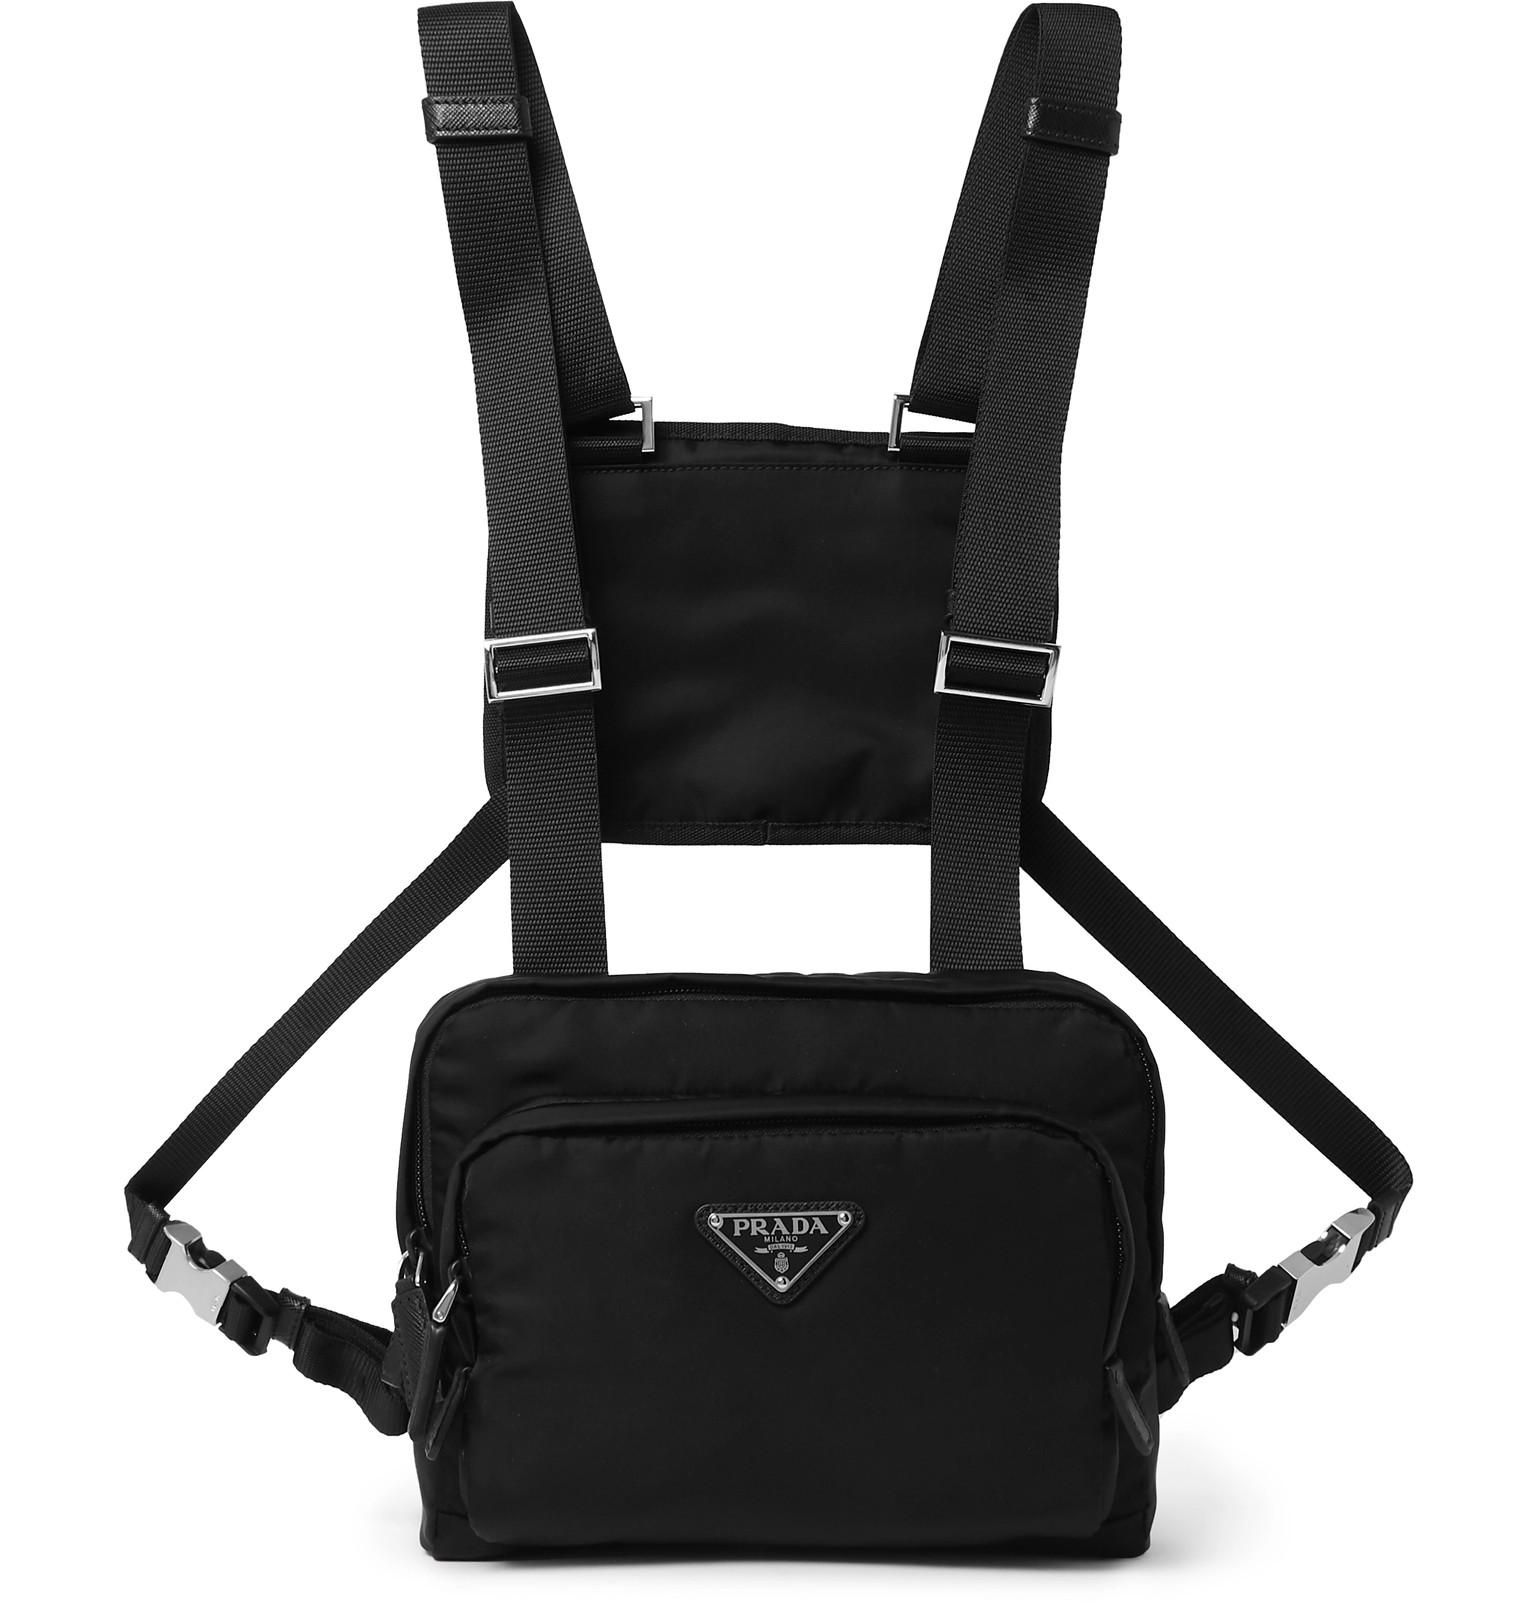 Prada Synthetic Leather-trimmed Nylon Harness Bag in Black for Men - Lyst